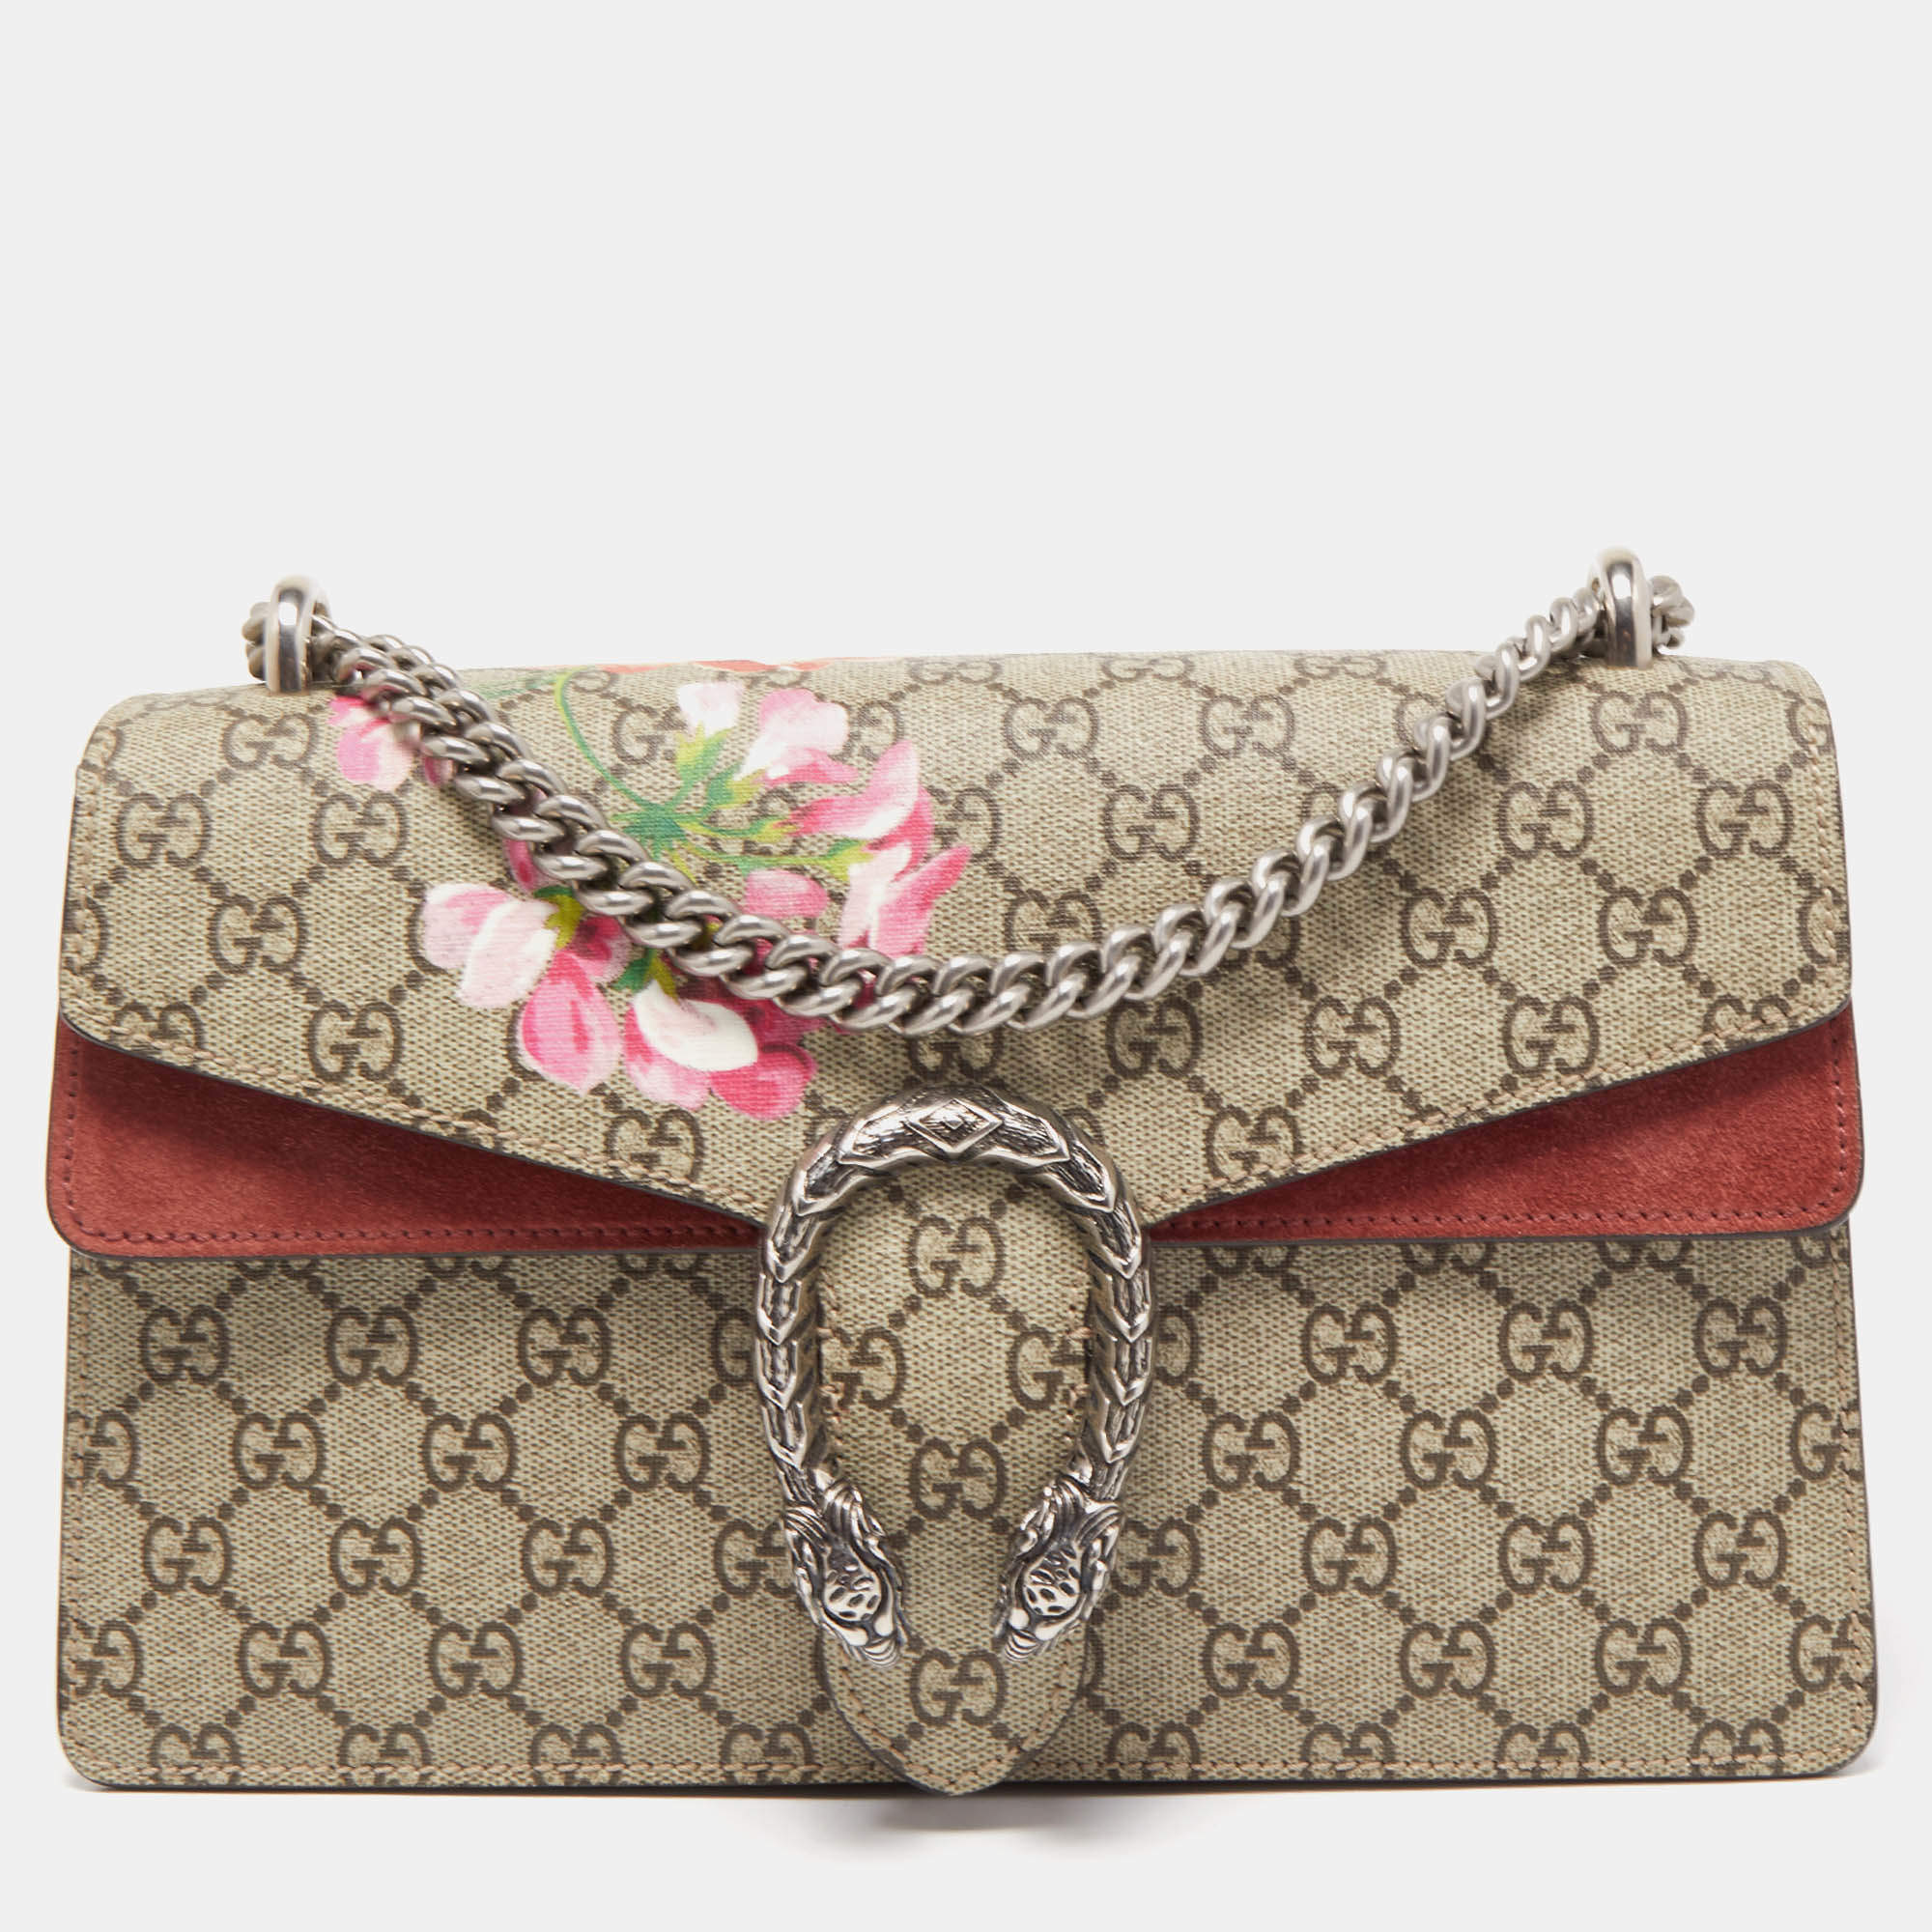 Gucci GG Supreme Small Blooms Clutch - Pink Clutches, Handbags